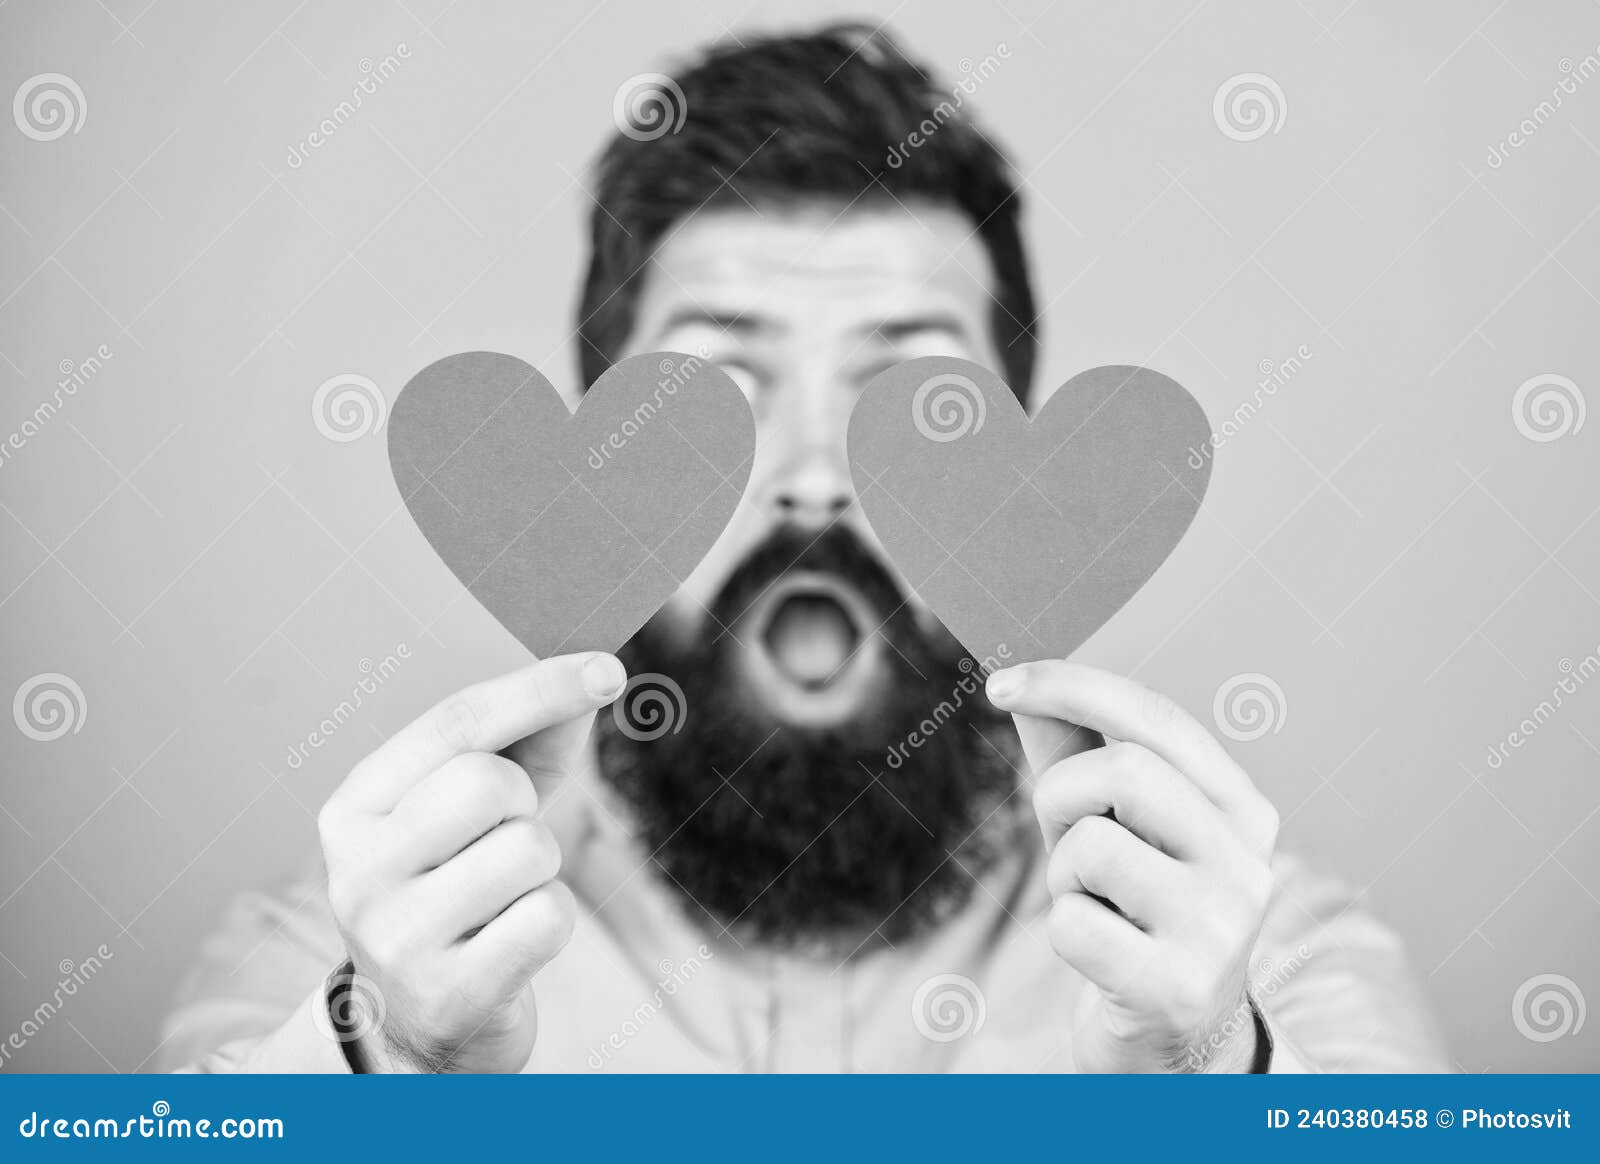 Guy Attractive With Beard And Mustache In Romantic Mood Feeling Love Dating And Relations